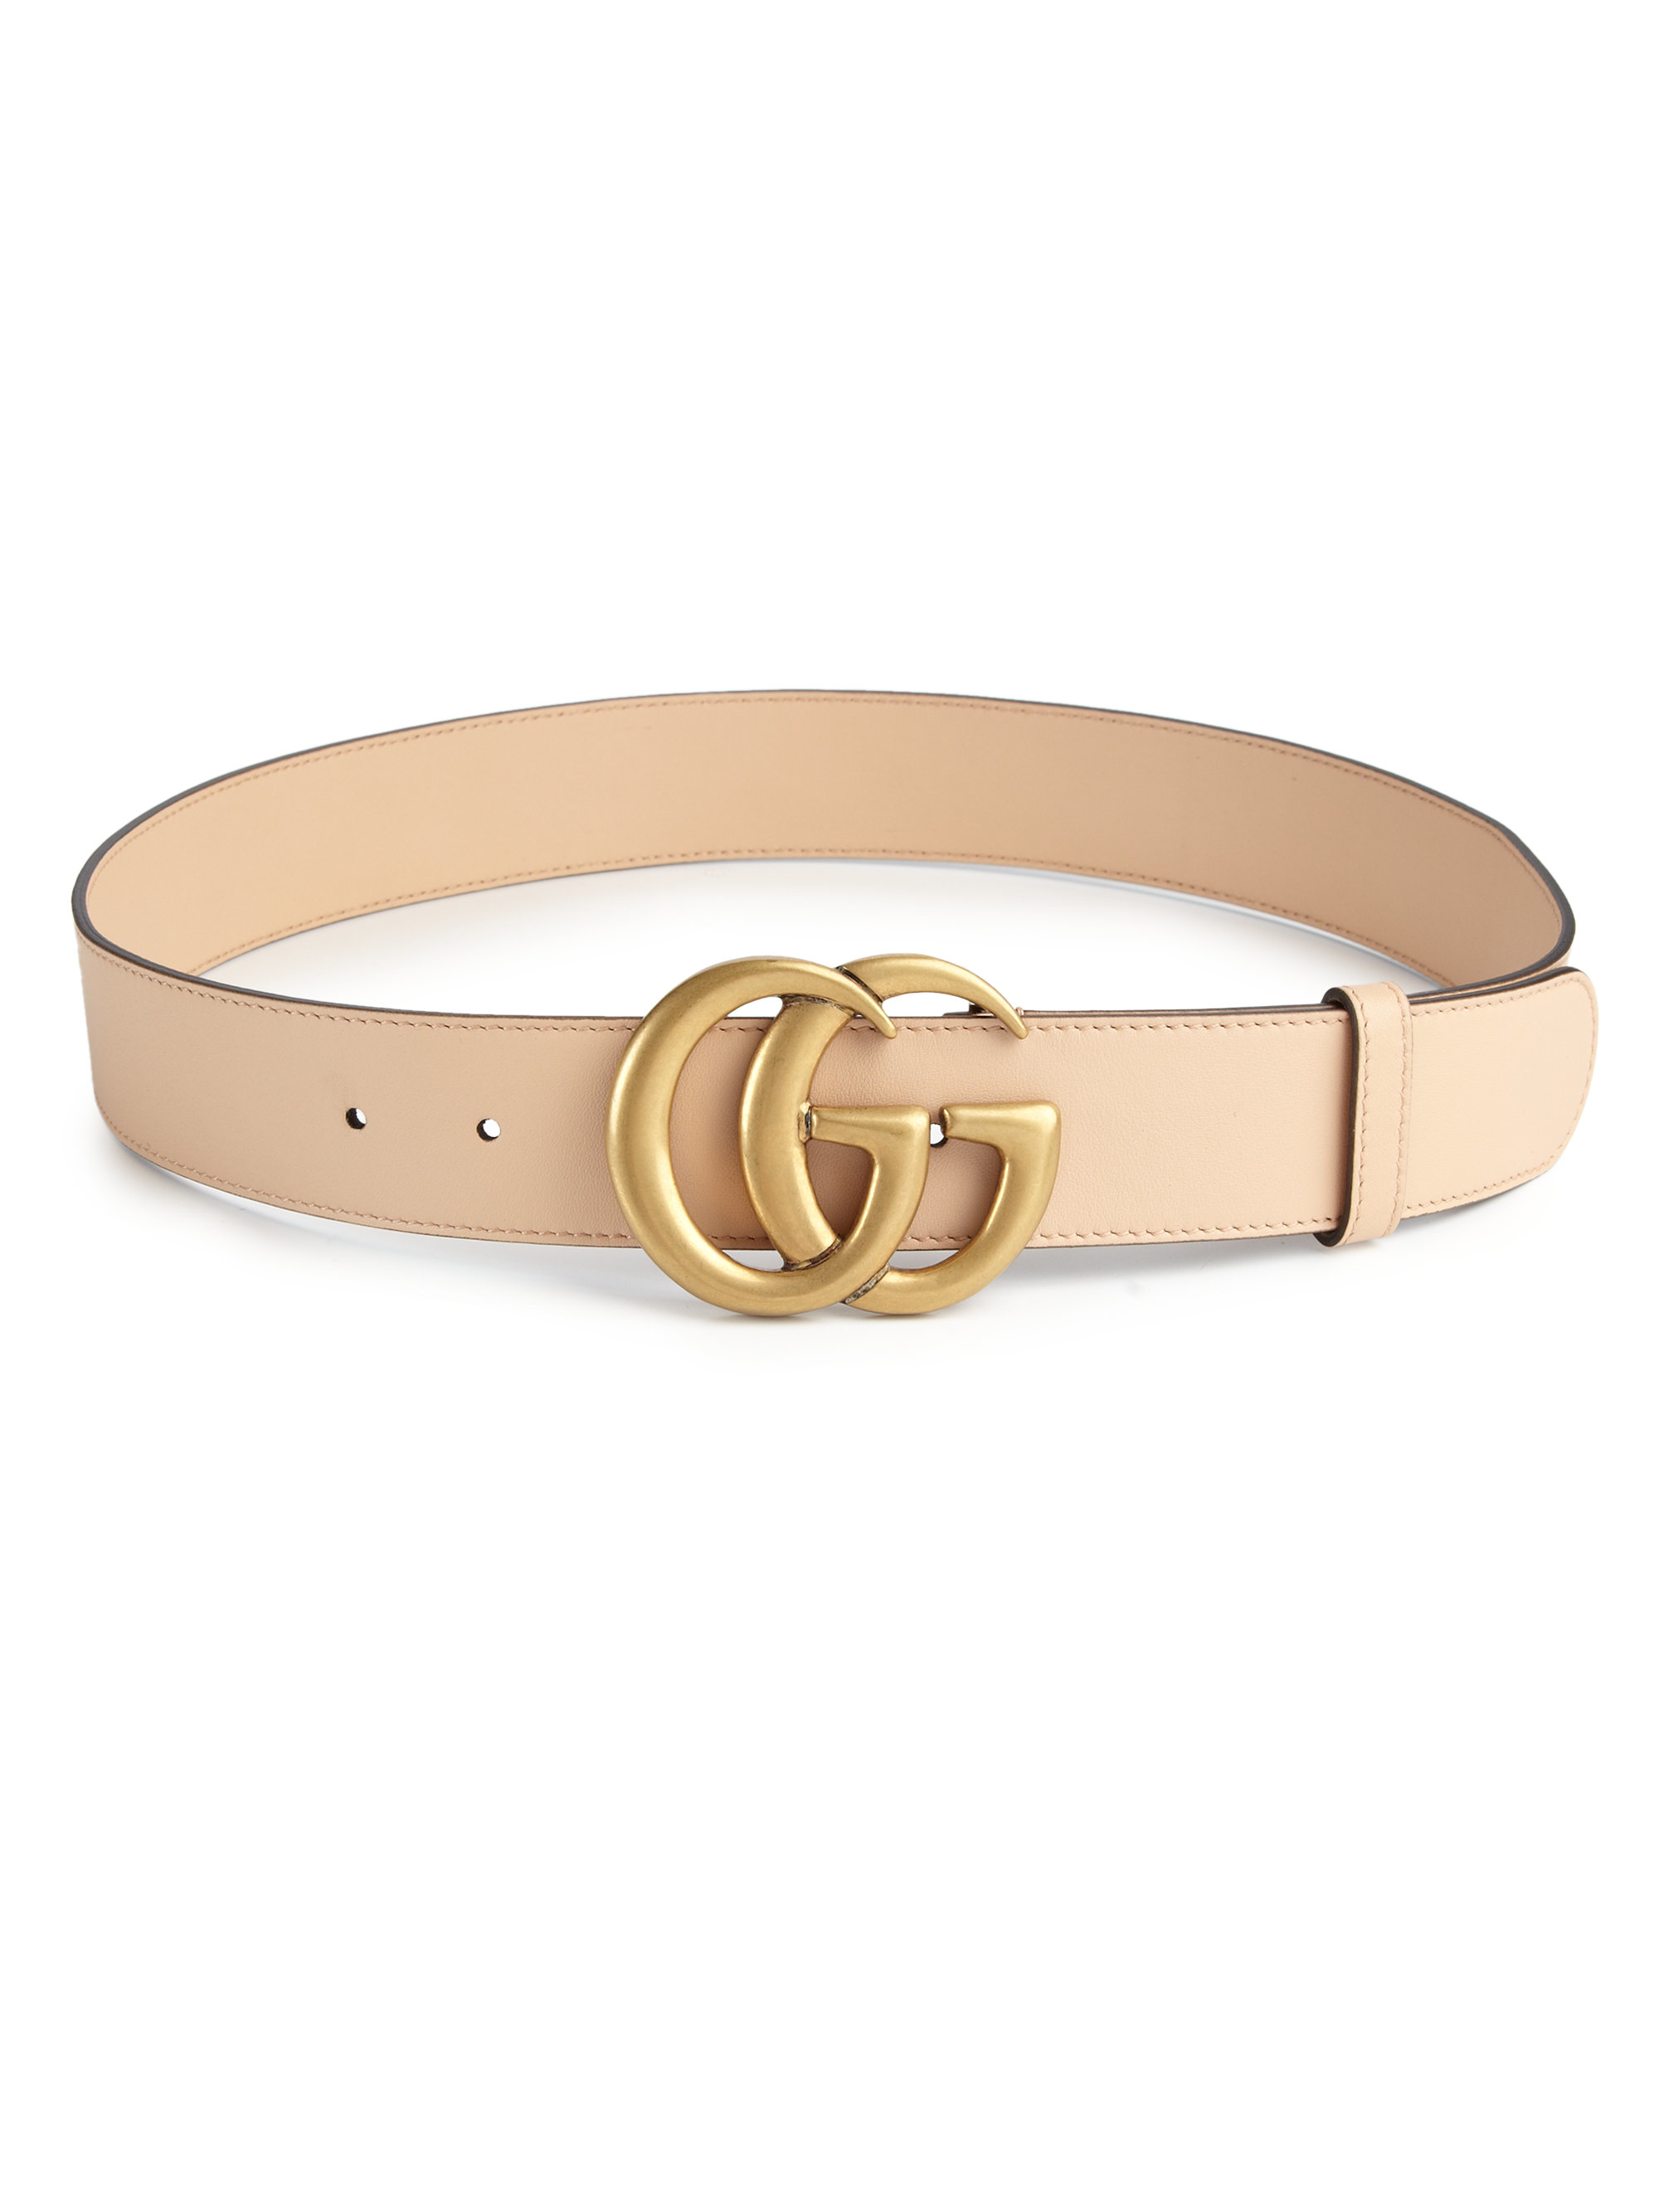 Gucci Gg Leather Belt in Beige (sand) | Lyst